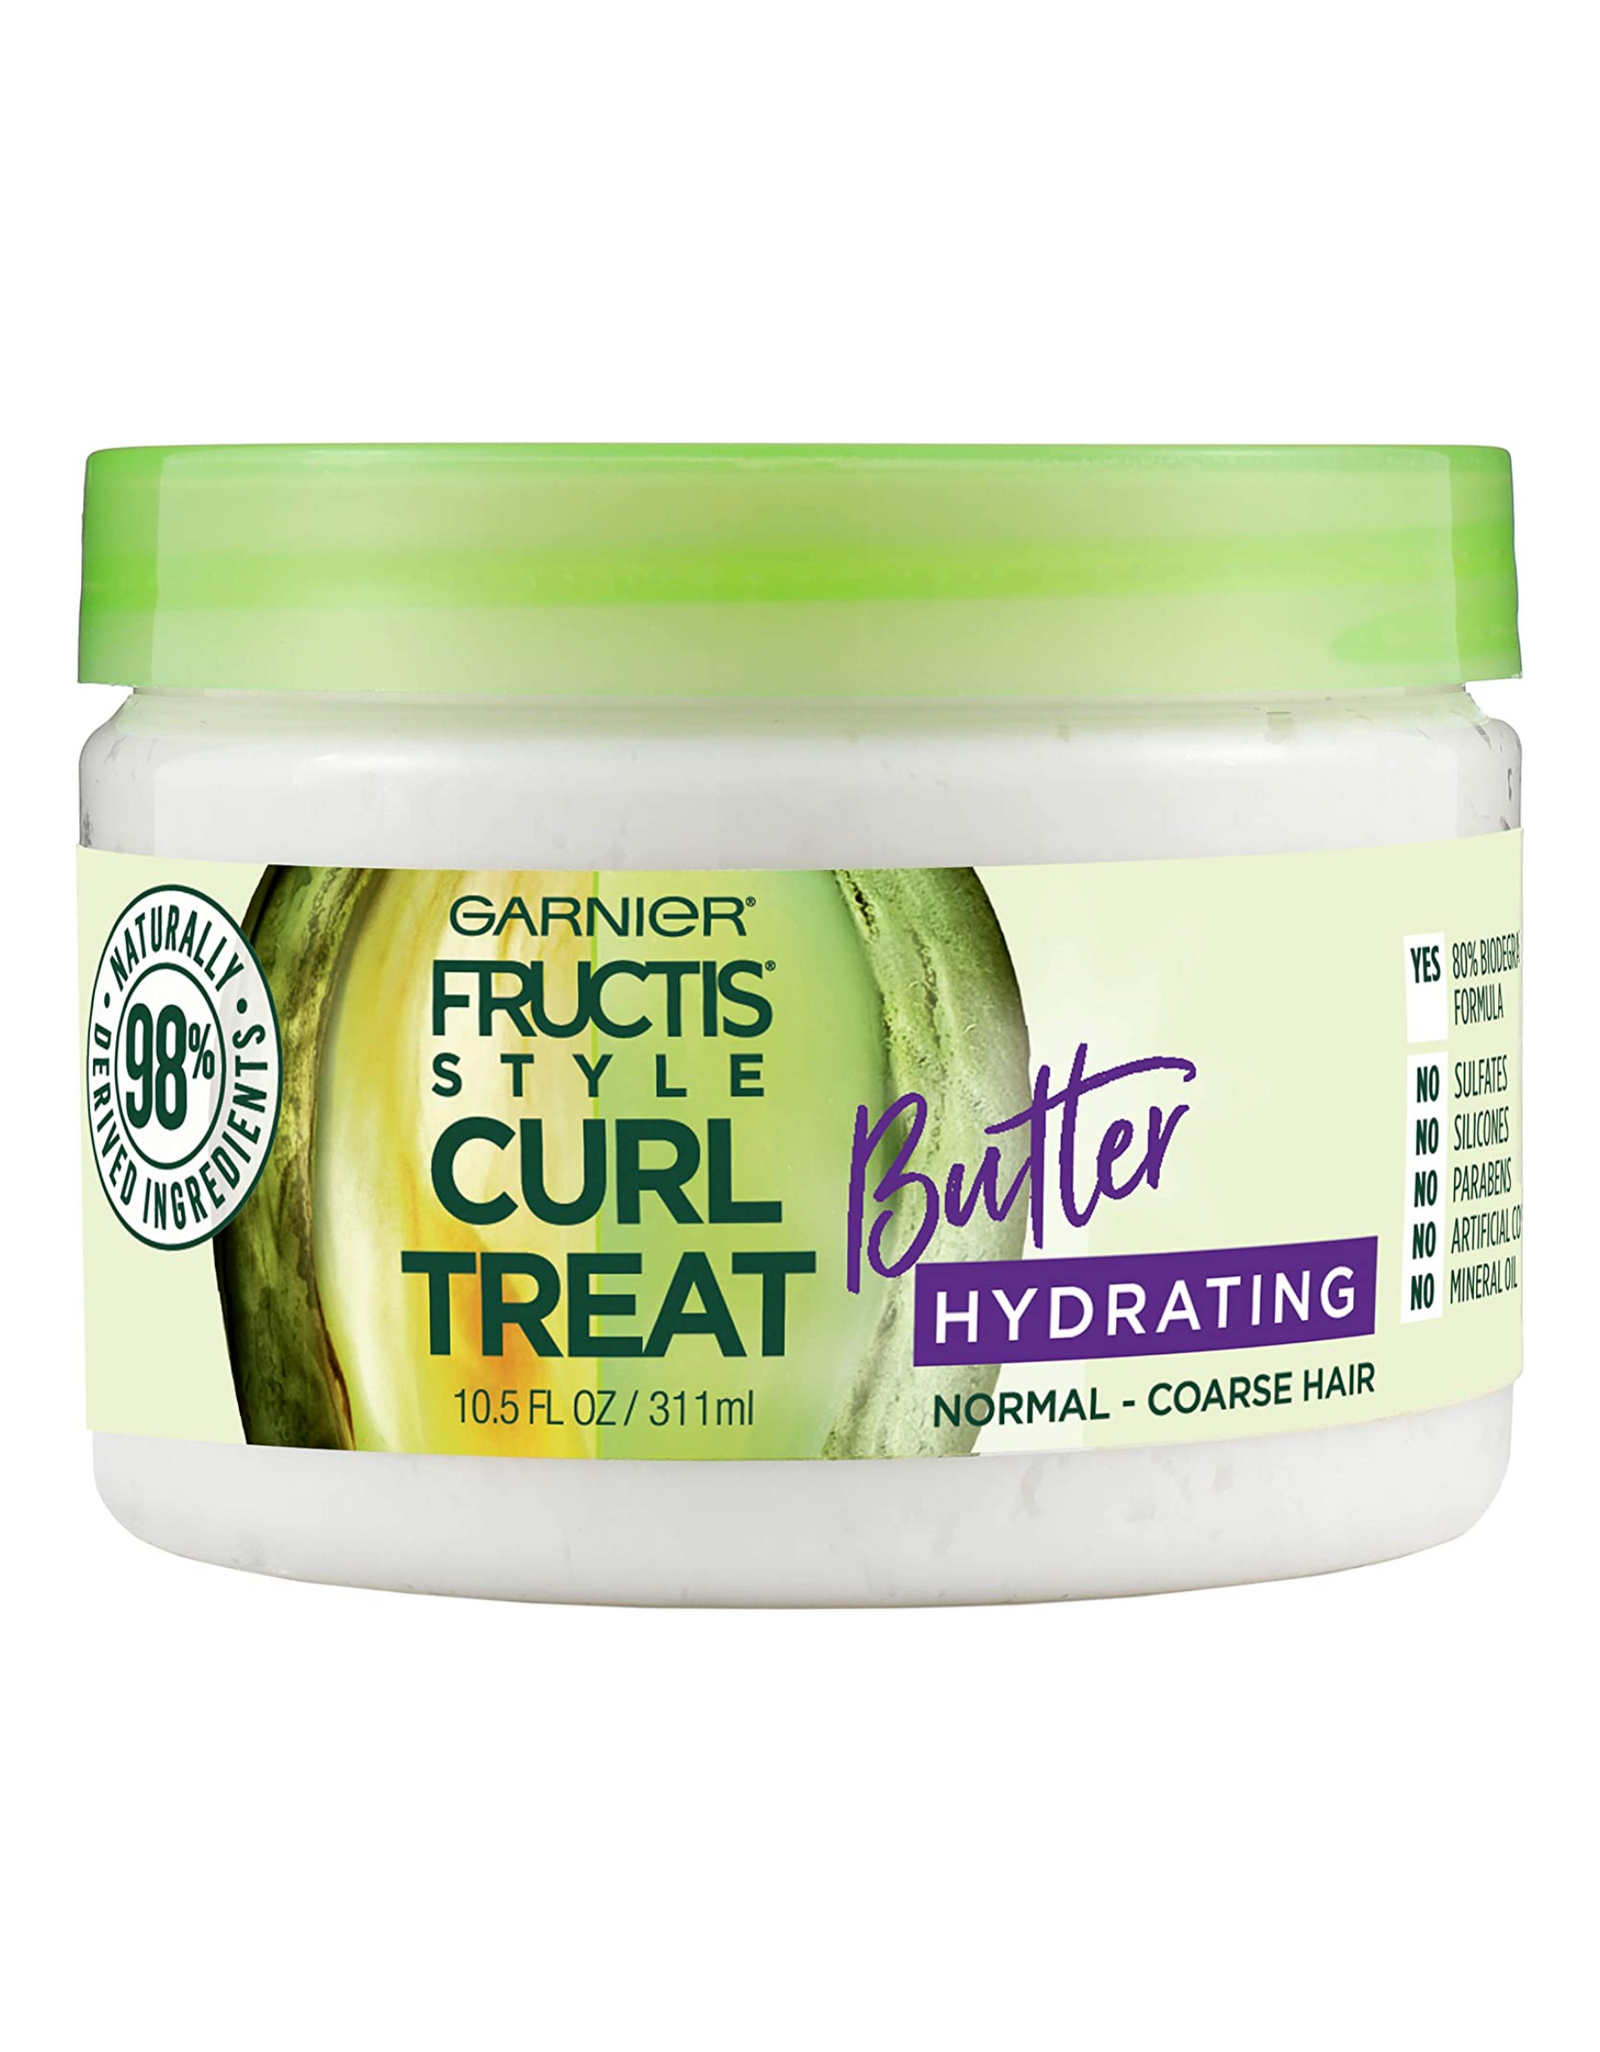 Garnier Fructis Style Curl Treat Hydrating Butter, Normal to Coarse Curly Hair, 10.5 oz